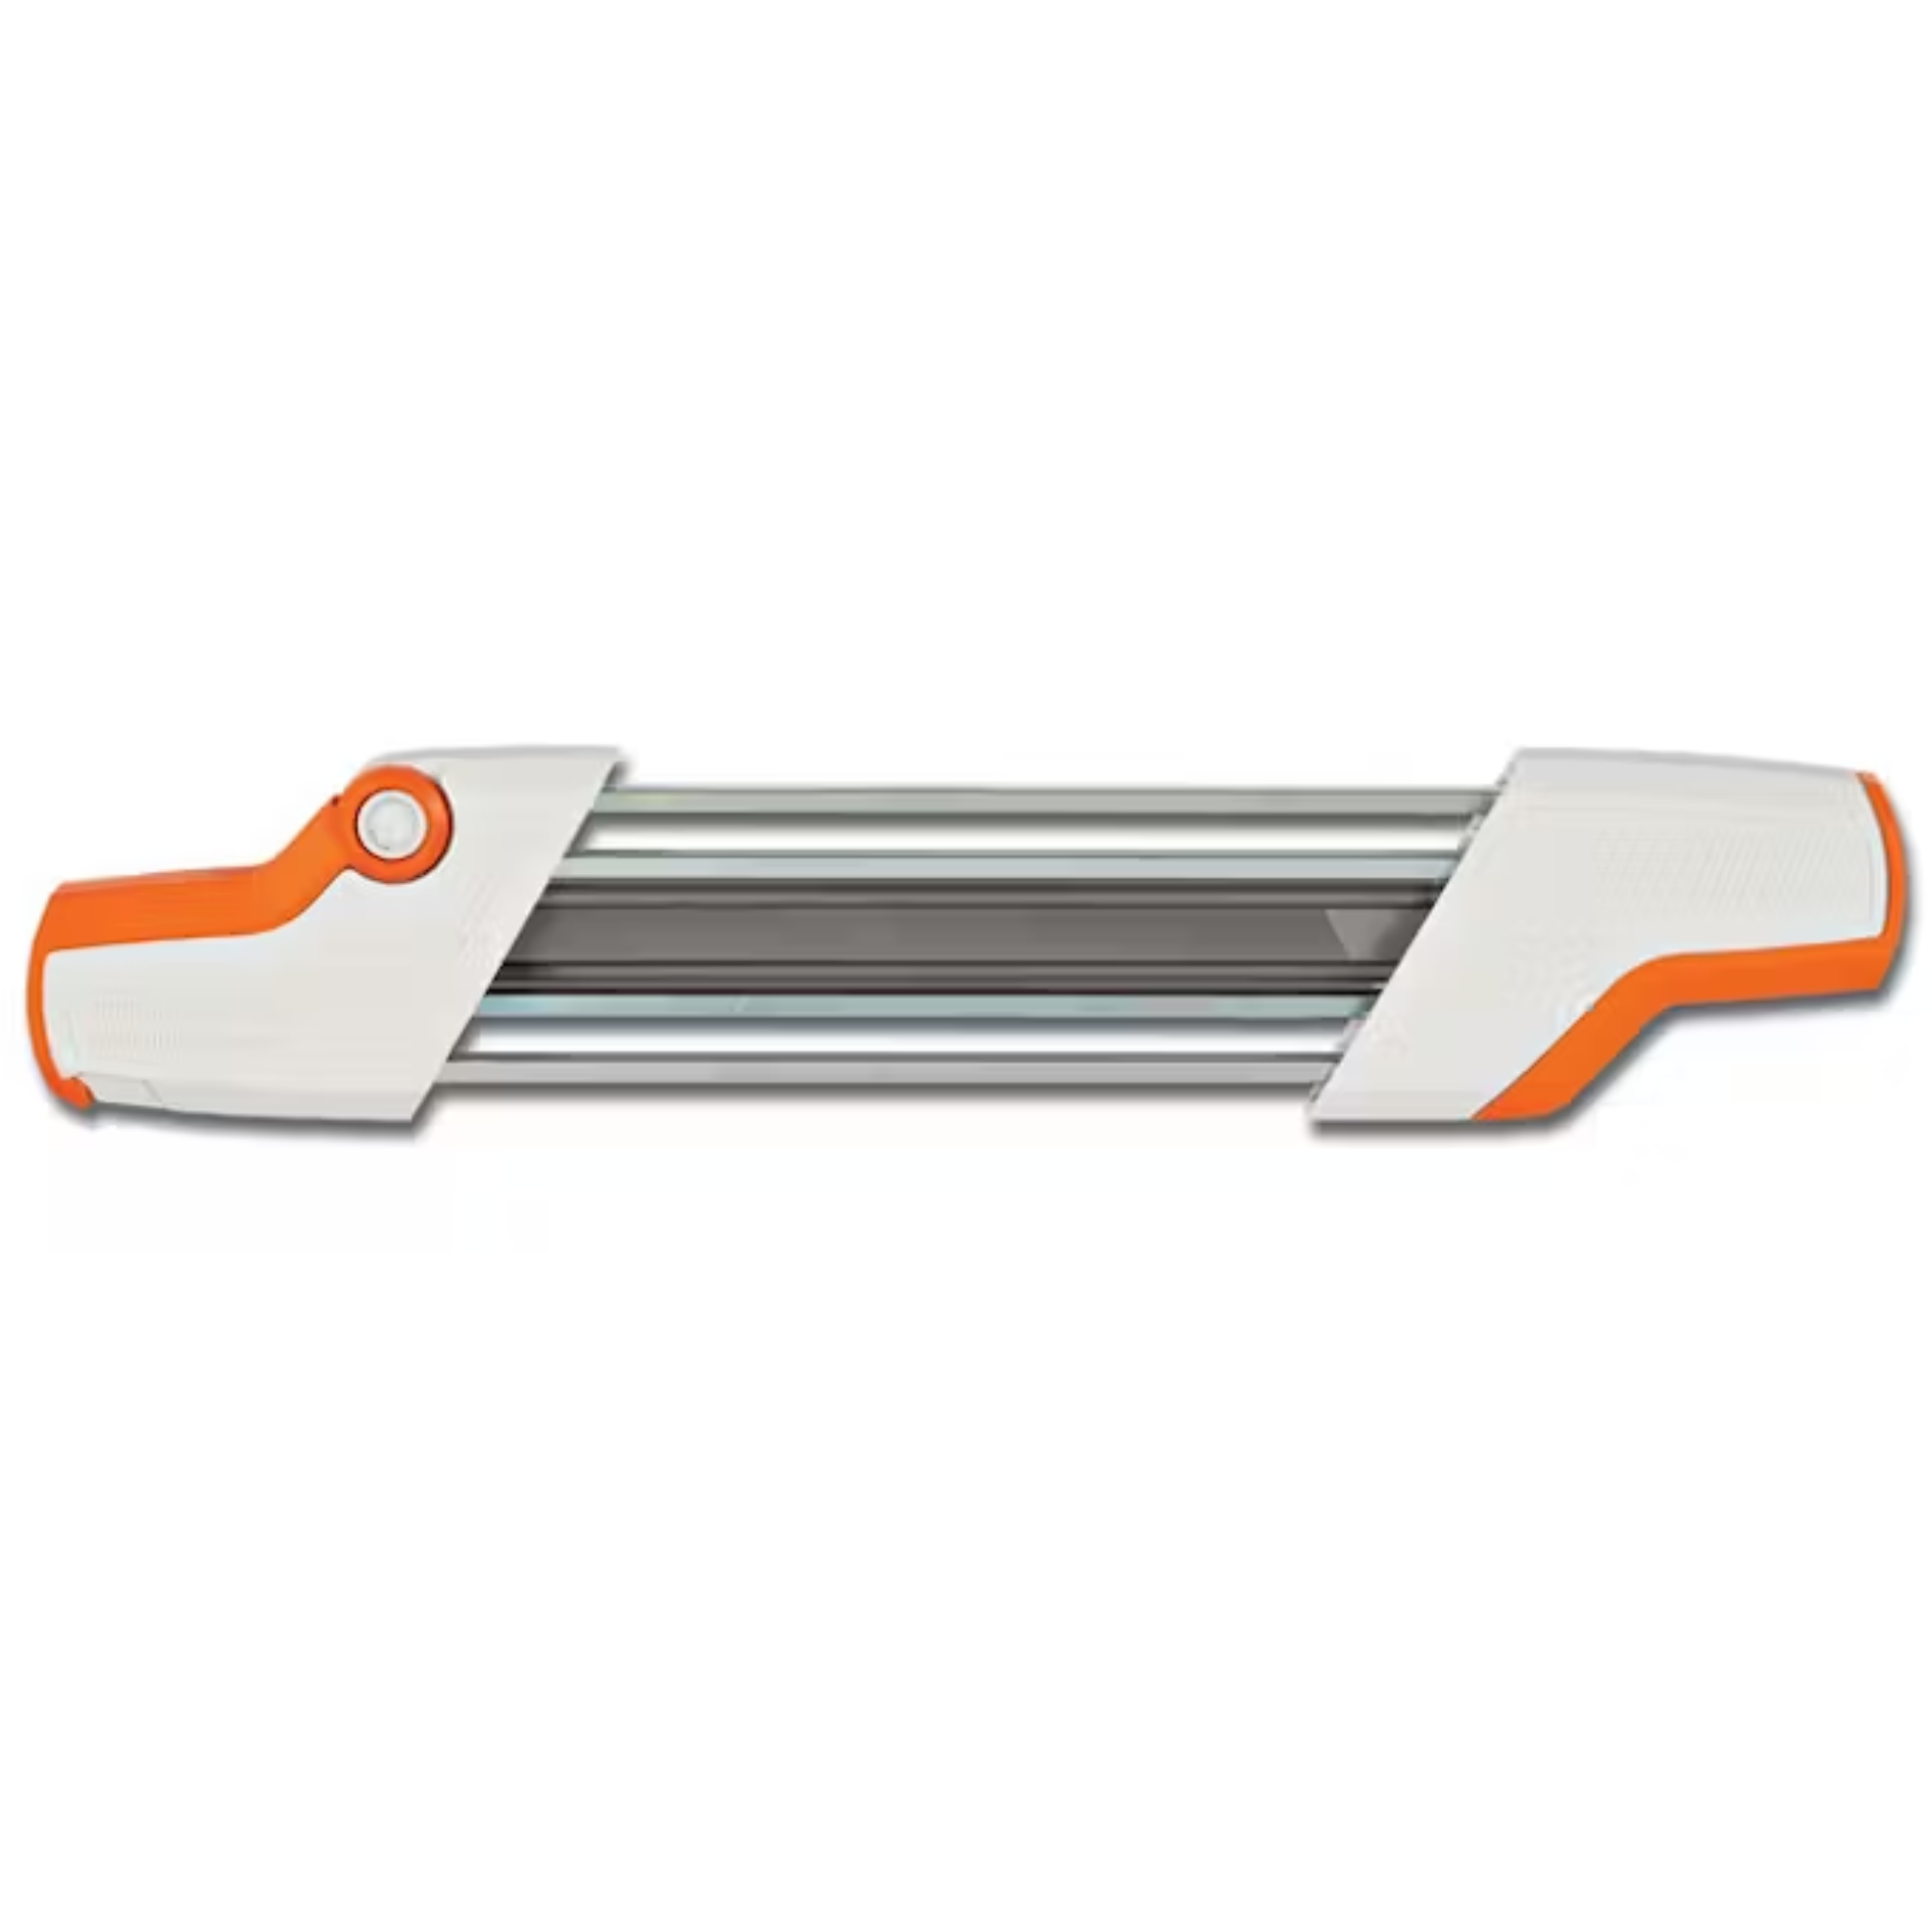 Stihl 2 in 1 Filing Guide & Saw Chain Sharpener .325in | 5605 750 4304